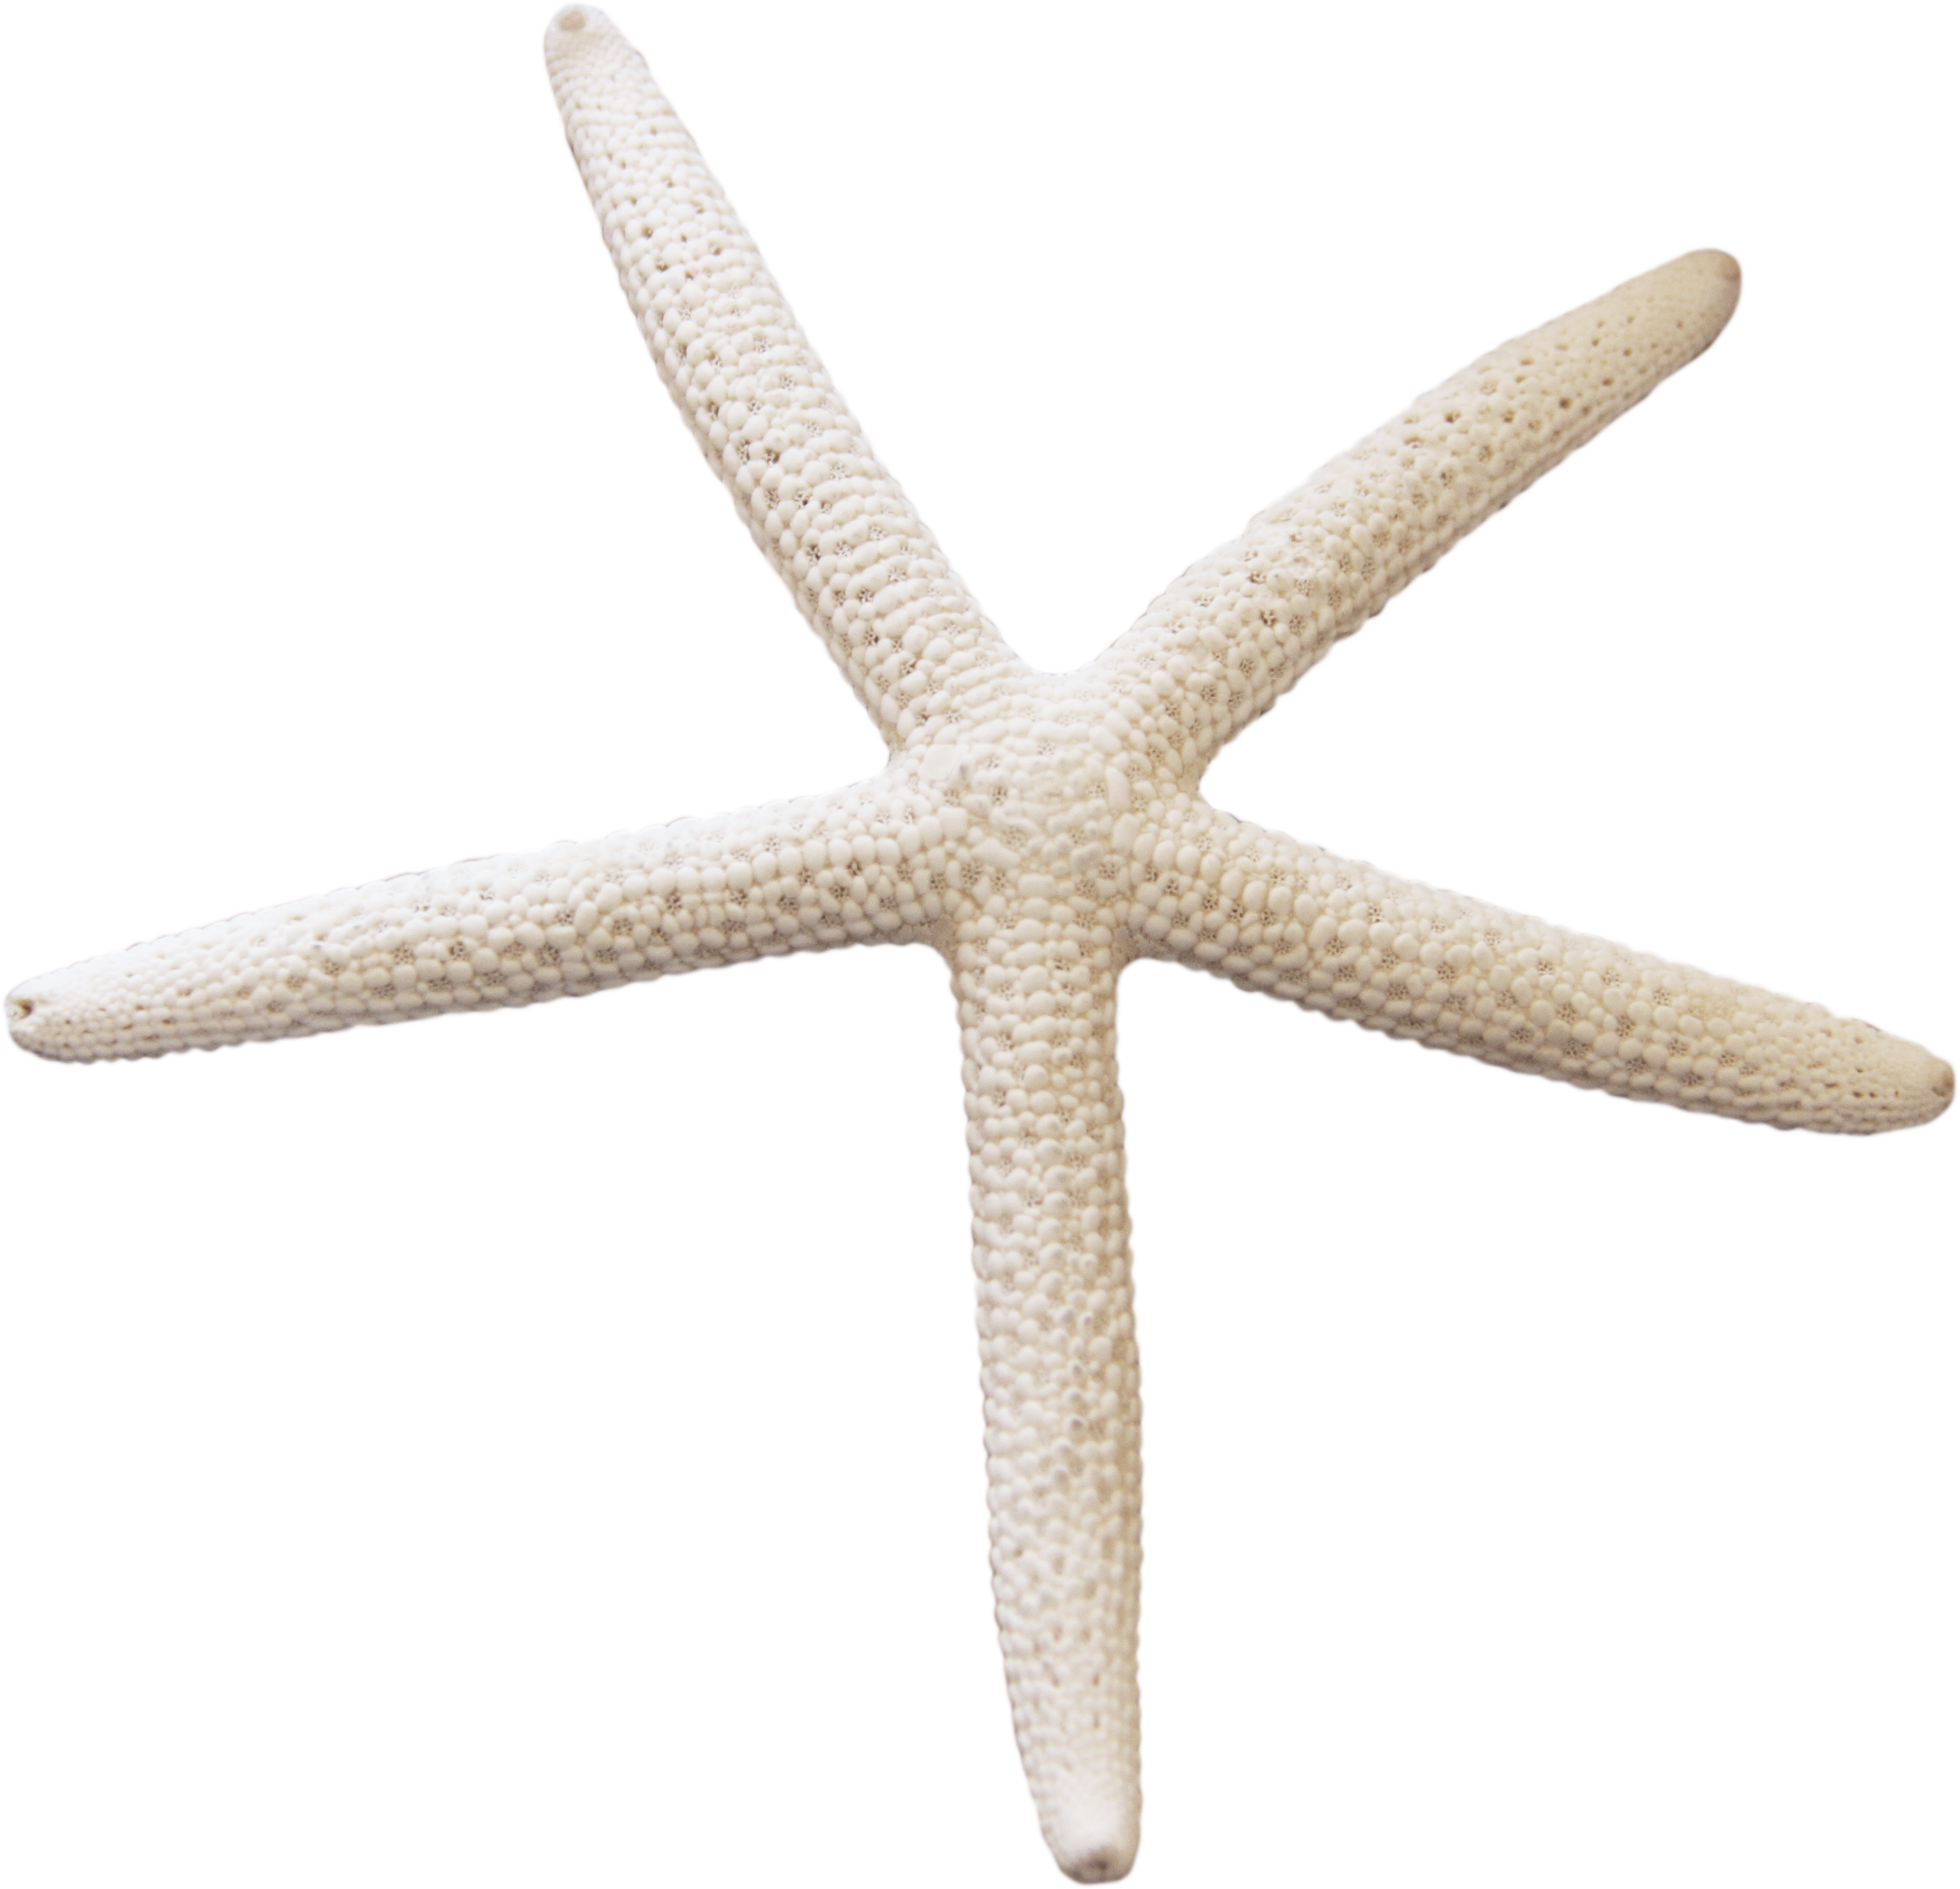 Starfish PNG HD Images